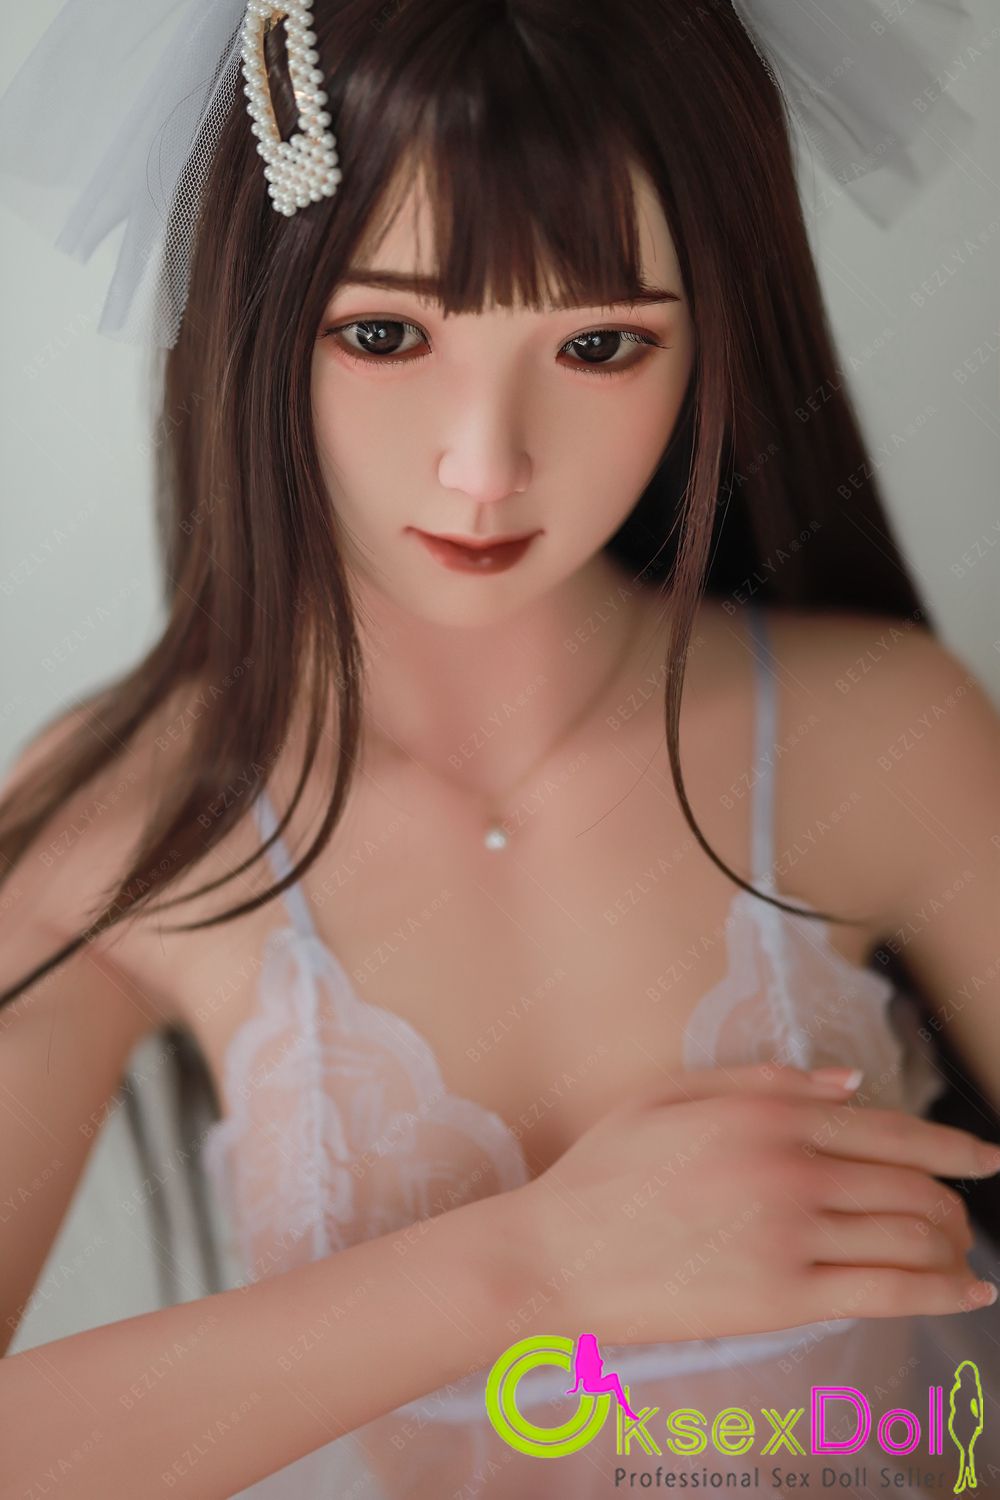 Small Tits sex doll Photos